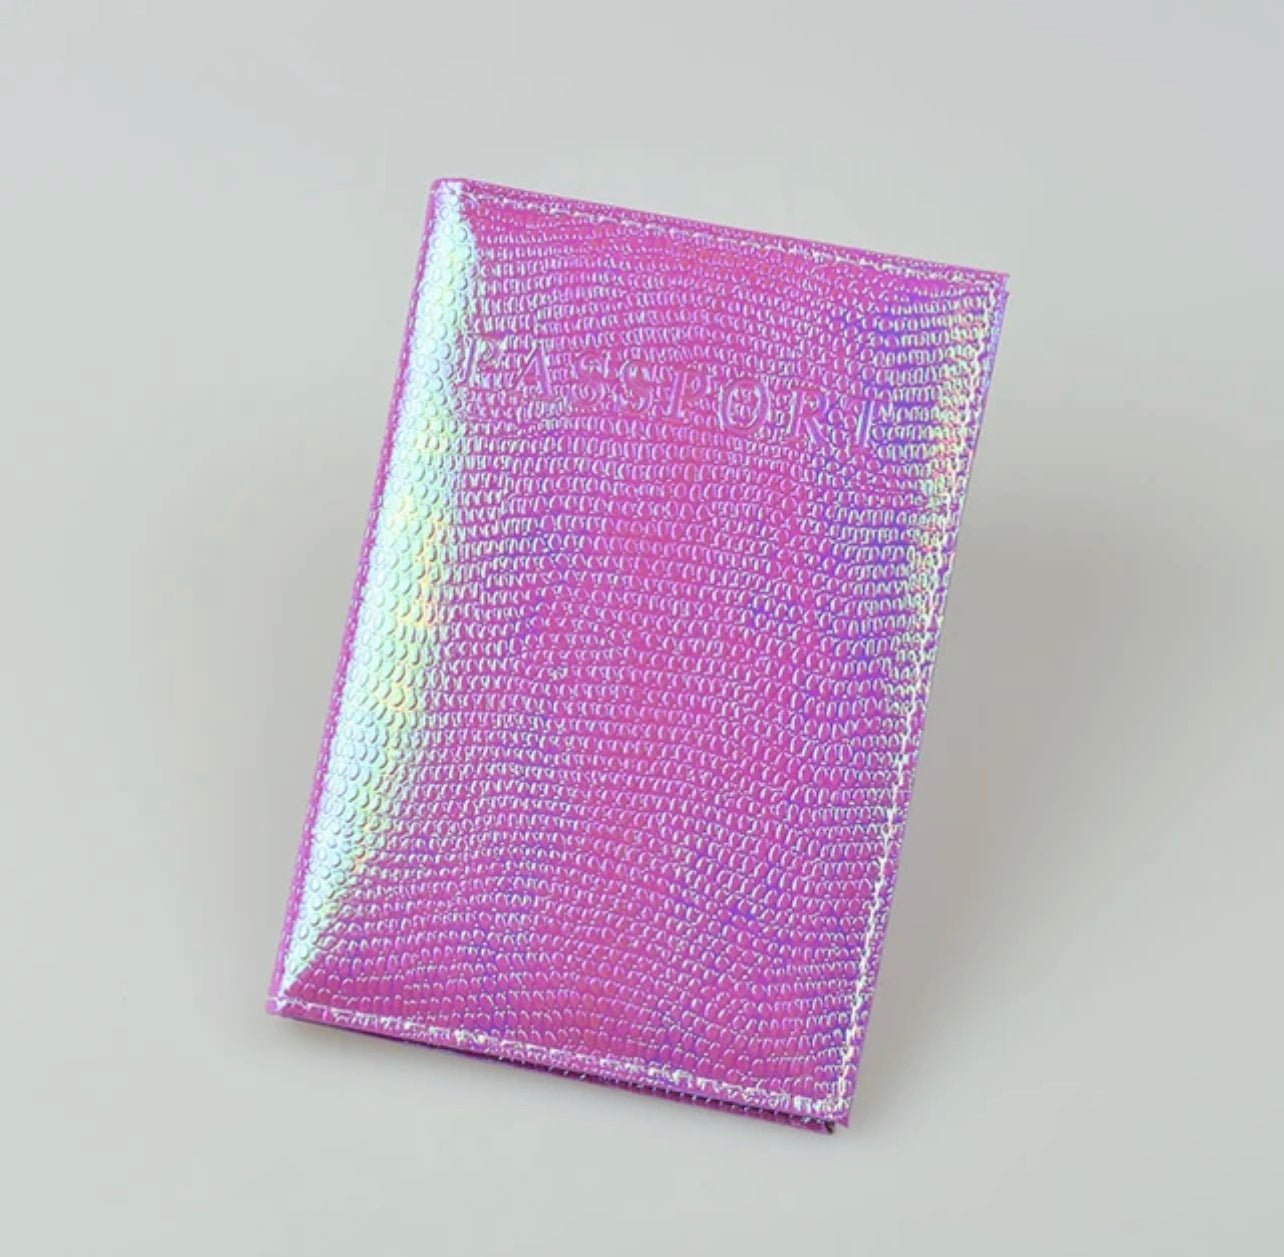 Never Lost Passport Cover 5 Colors - Suite Ta Bu by Akidah